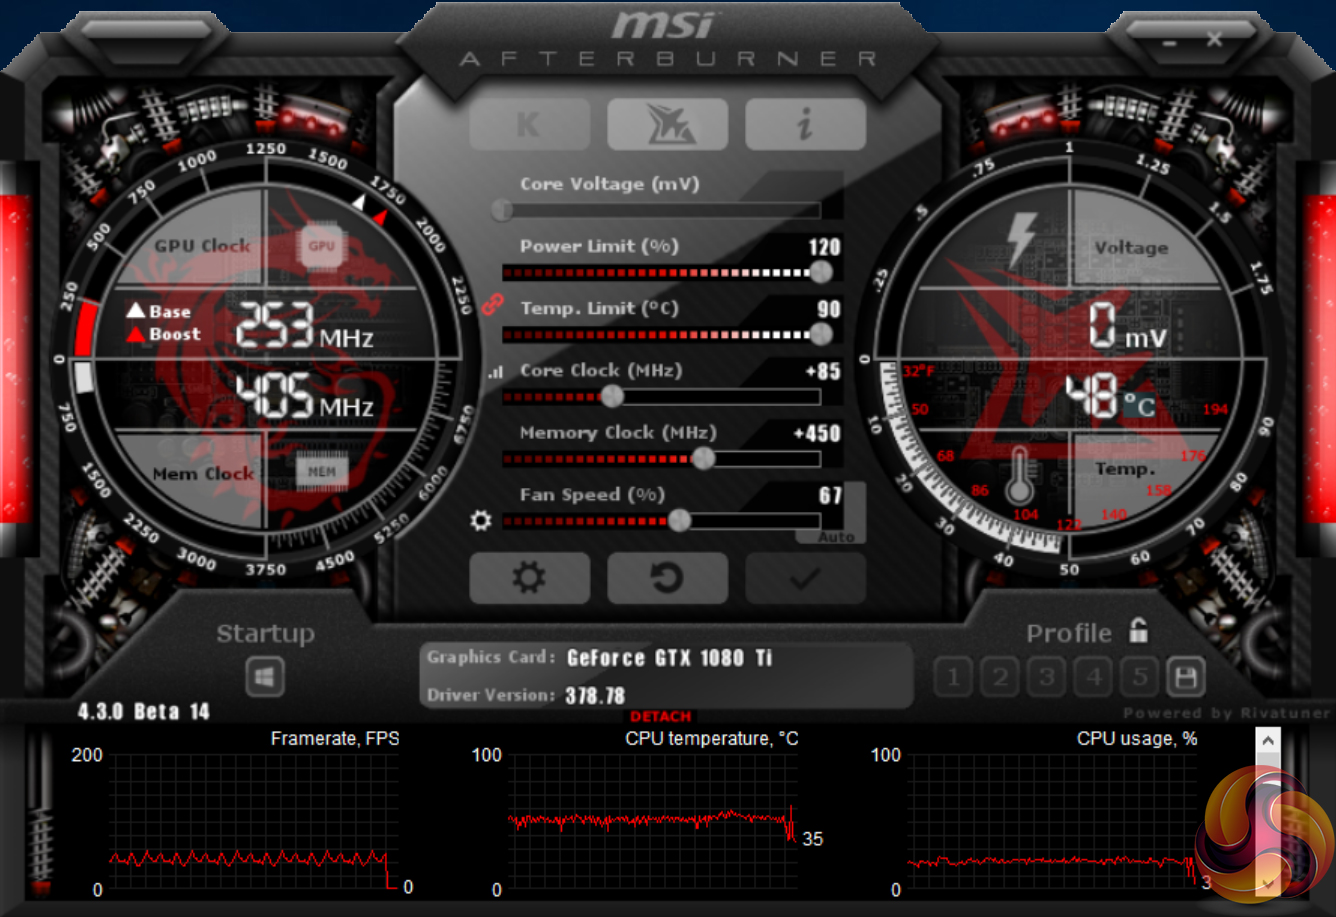 While I know the 4080 ROG Strix comes Overclocked does anyone know if there  are safe parameters for MSI Afterburner to Boost the Core Clock & Memory  Clock just a little more? 